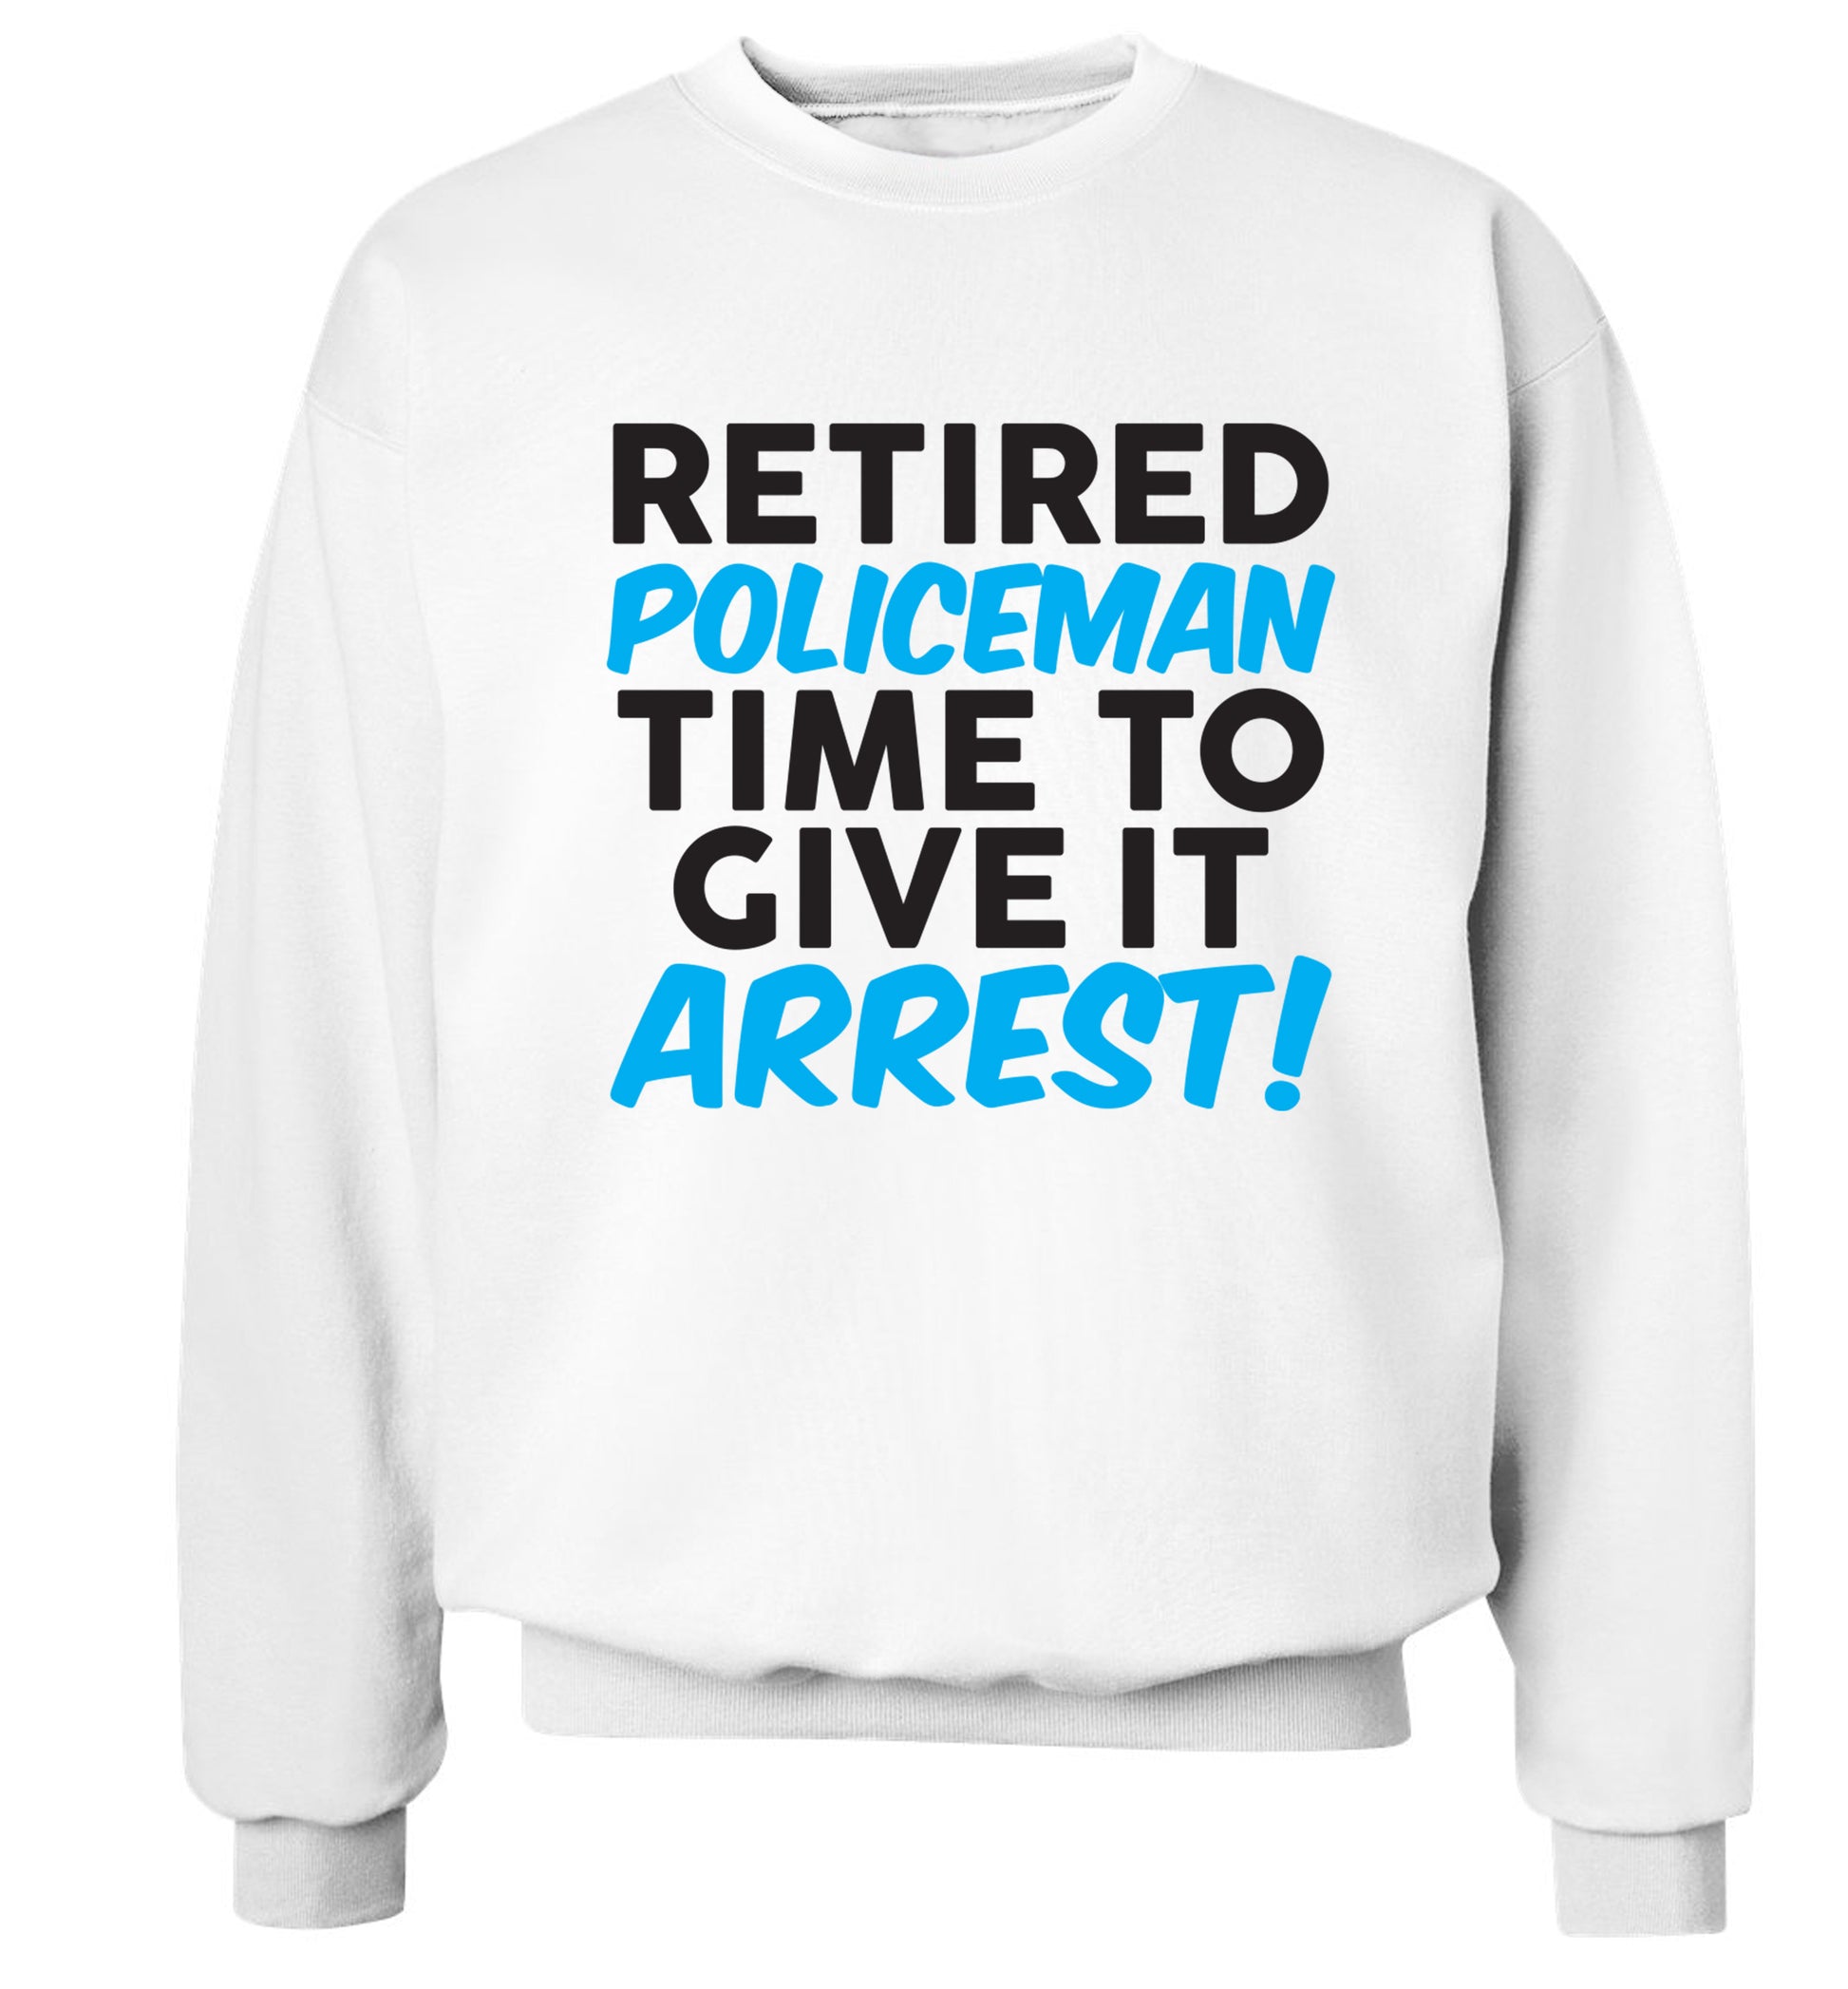 Retired policeman give it arresst! Adult's unisex white Sweater 2XL